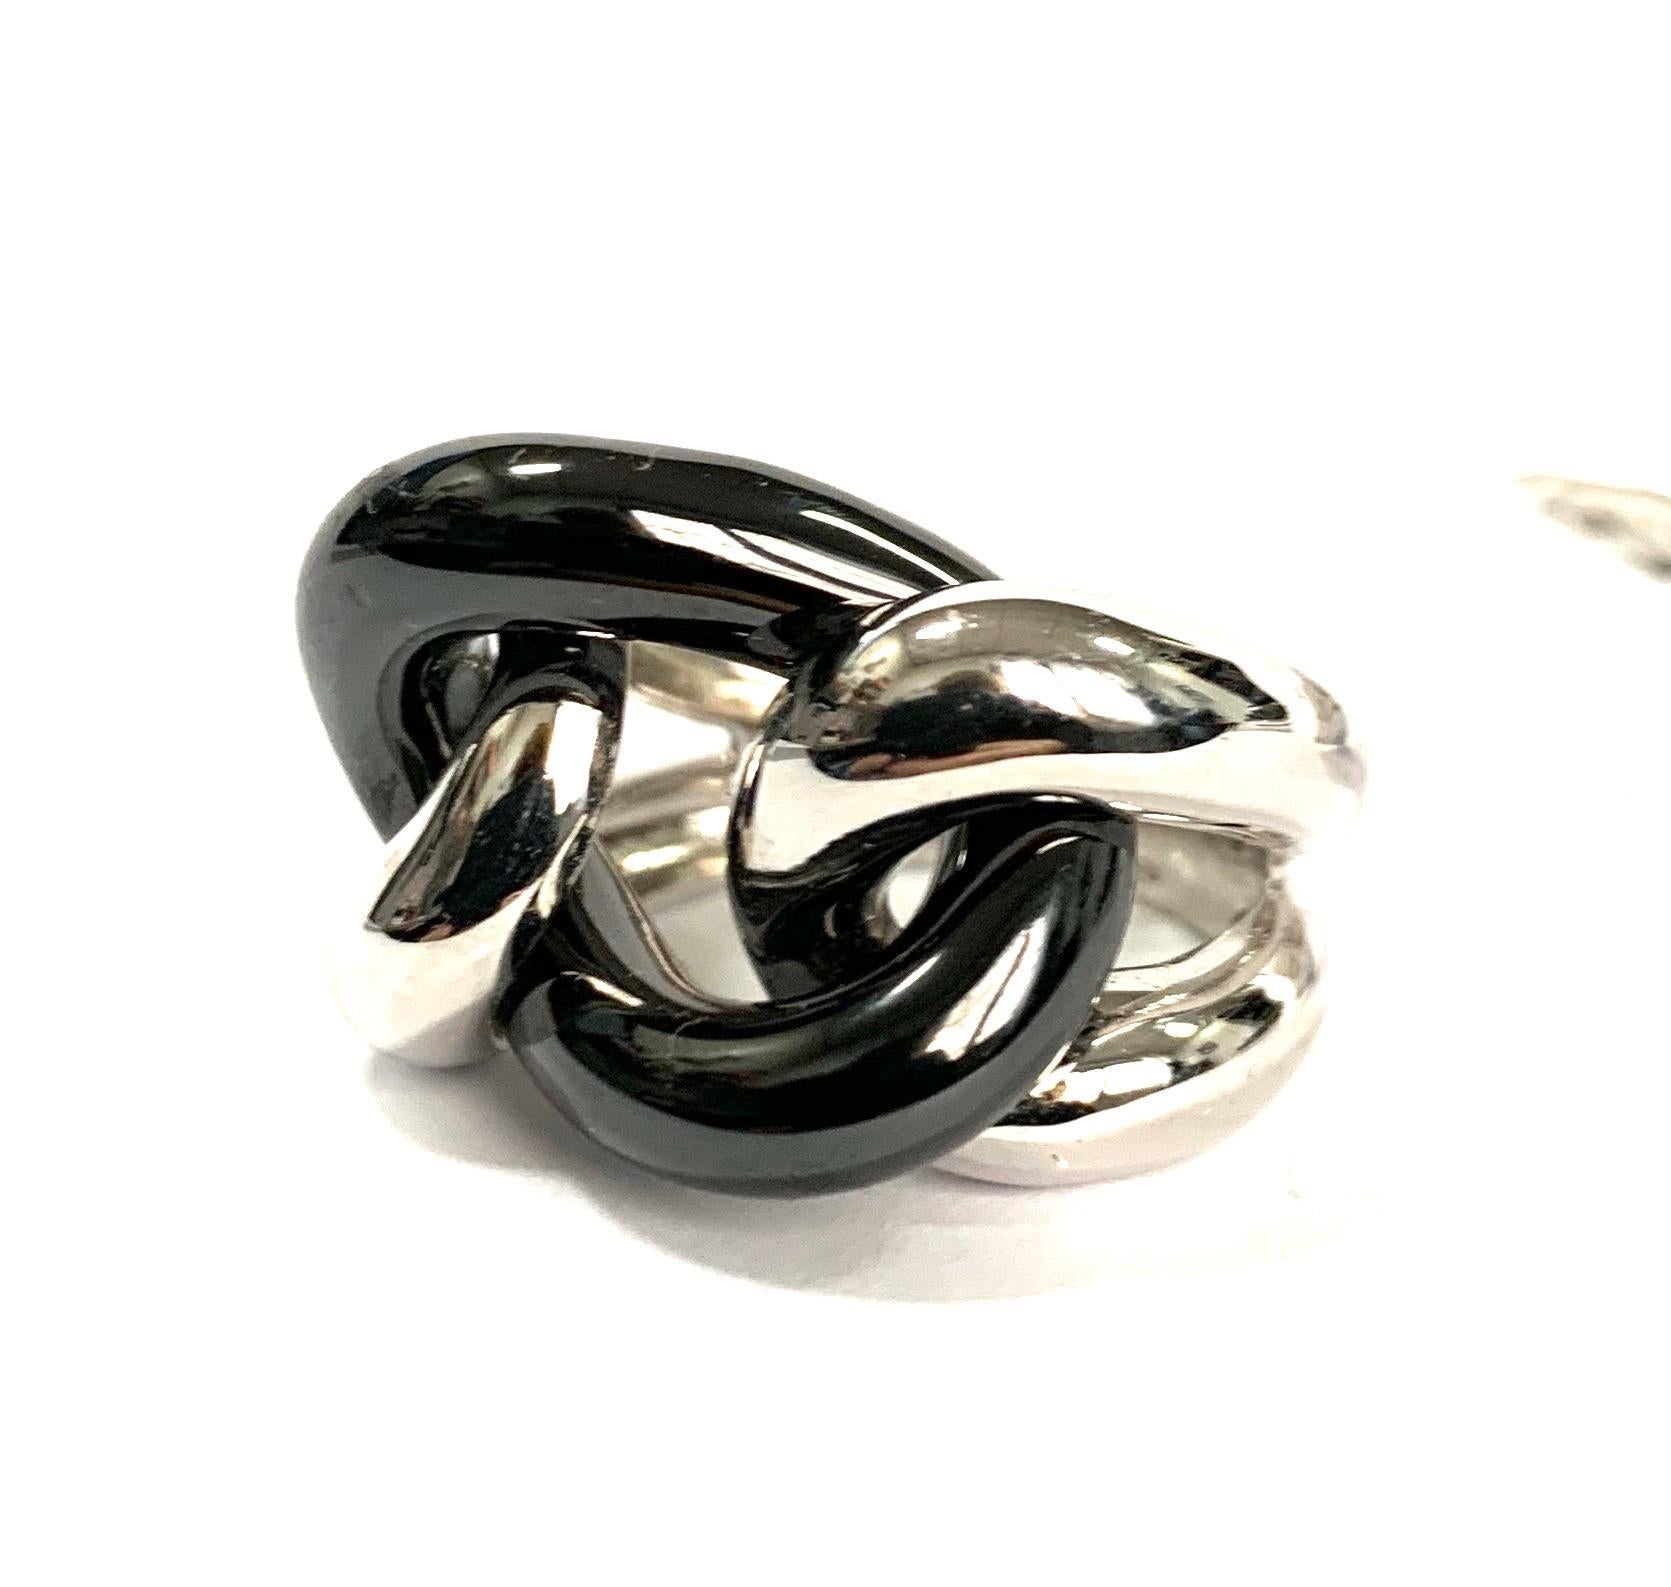 Black ceramic groumette ring in 18 kt white gold
The ceramic is a very resistant material. 
This iconic collection in Micheletto tradition was originally made only in gold just more or less 10 years ago it became very popular the ceramic